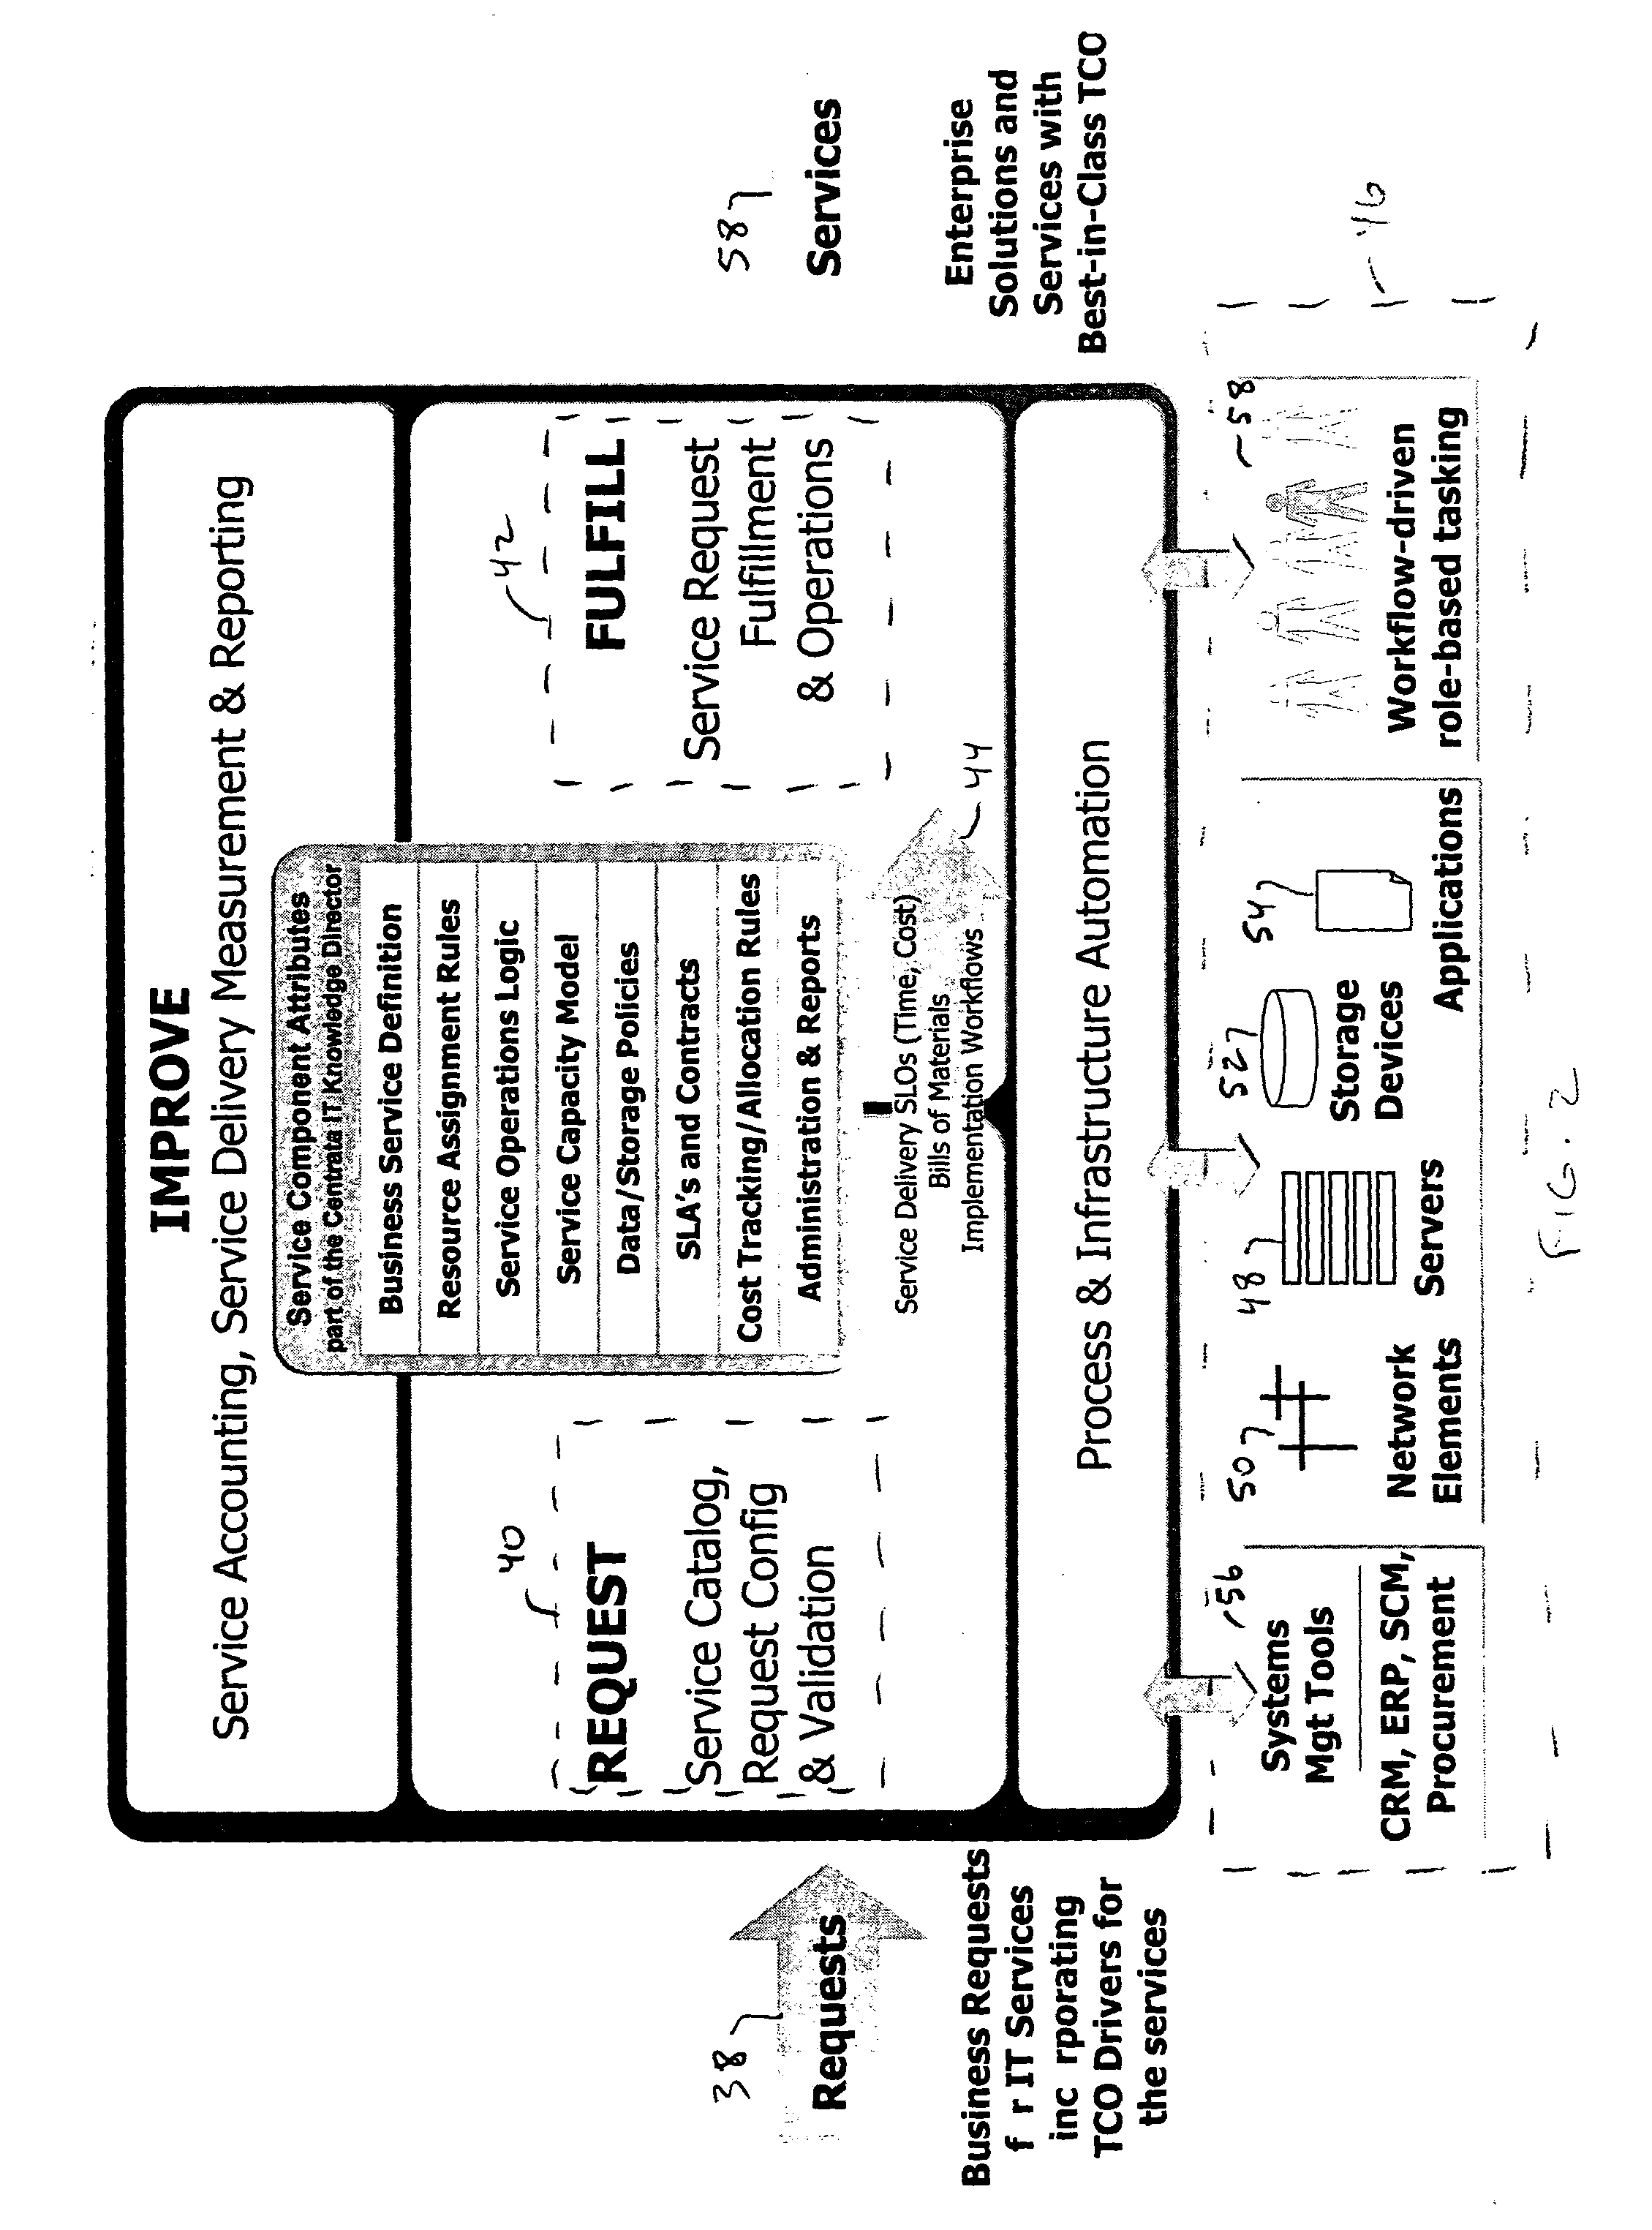 Process for creating service action data structures